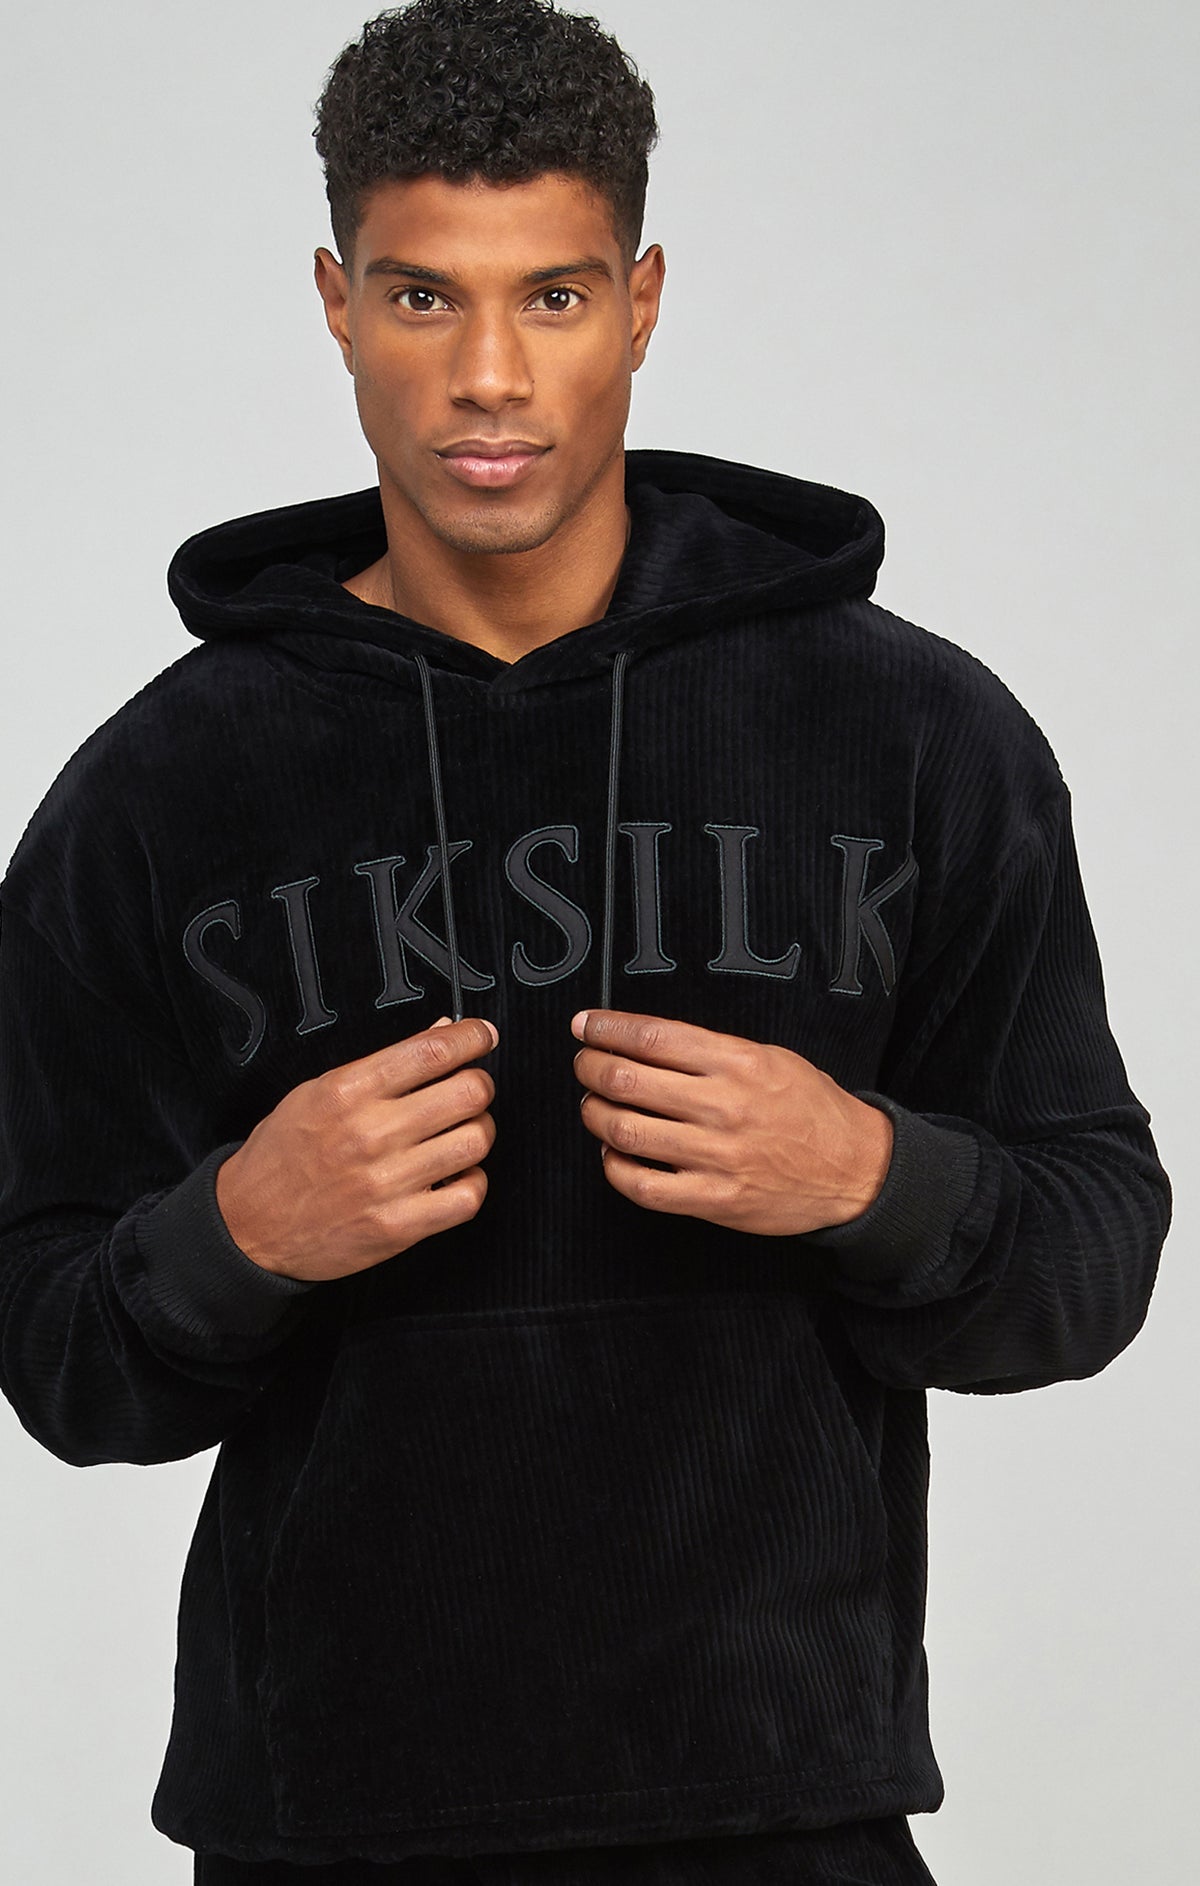 SikSilk - a Modern and Individual fashion brand online.